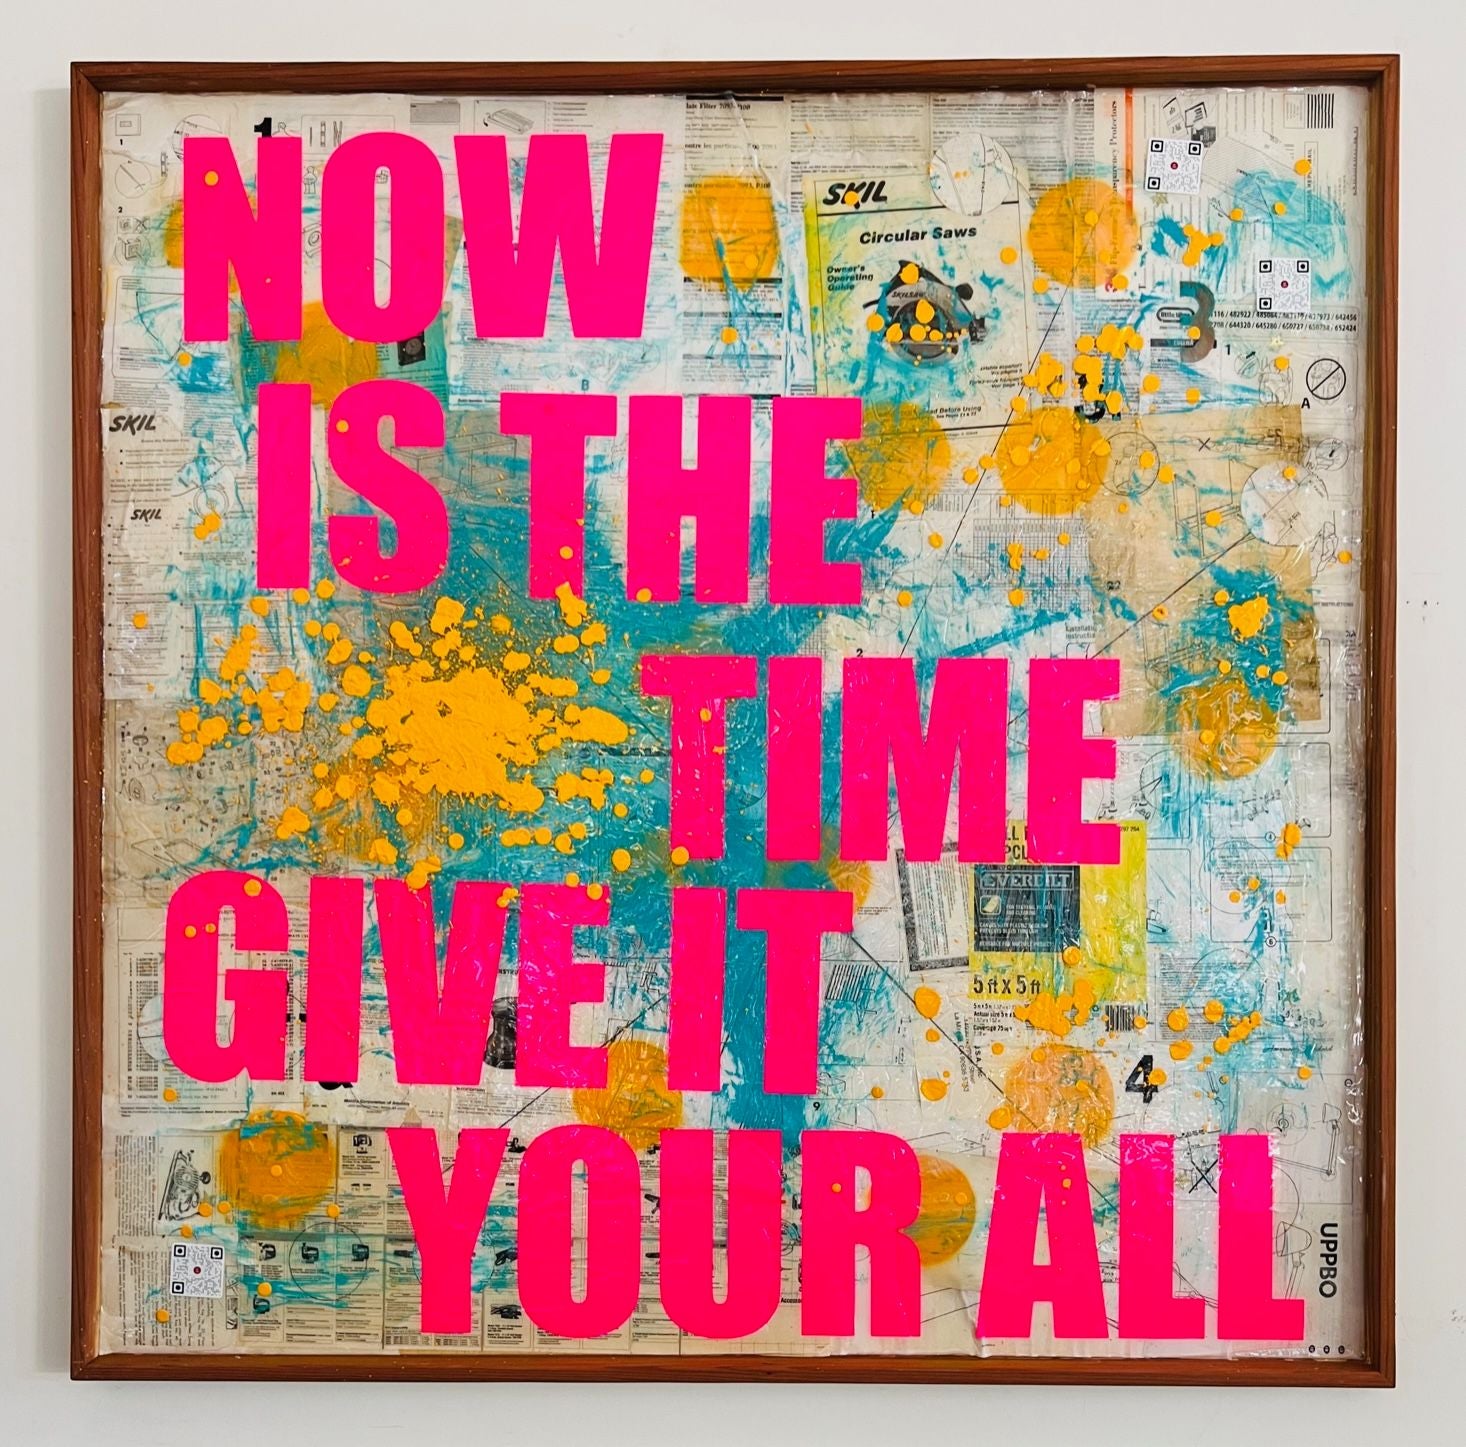 Joe Forte, “NOW IS THE TIME GIVE IT YOUR ALL”